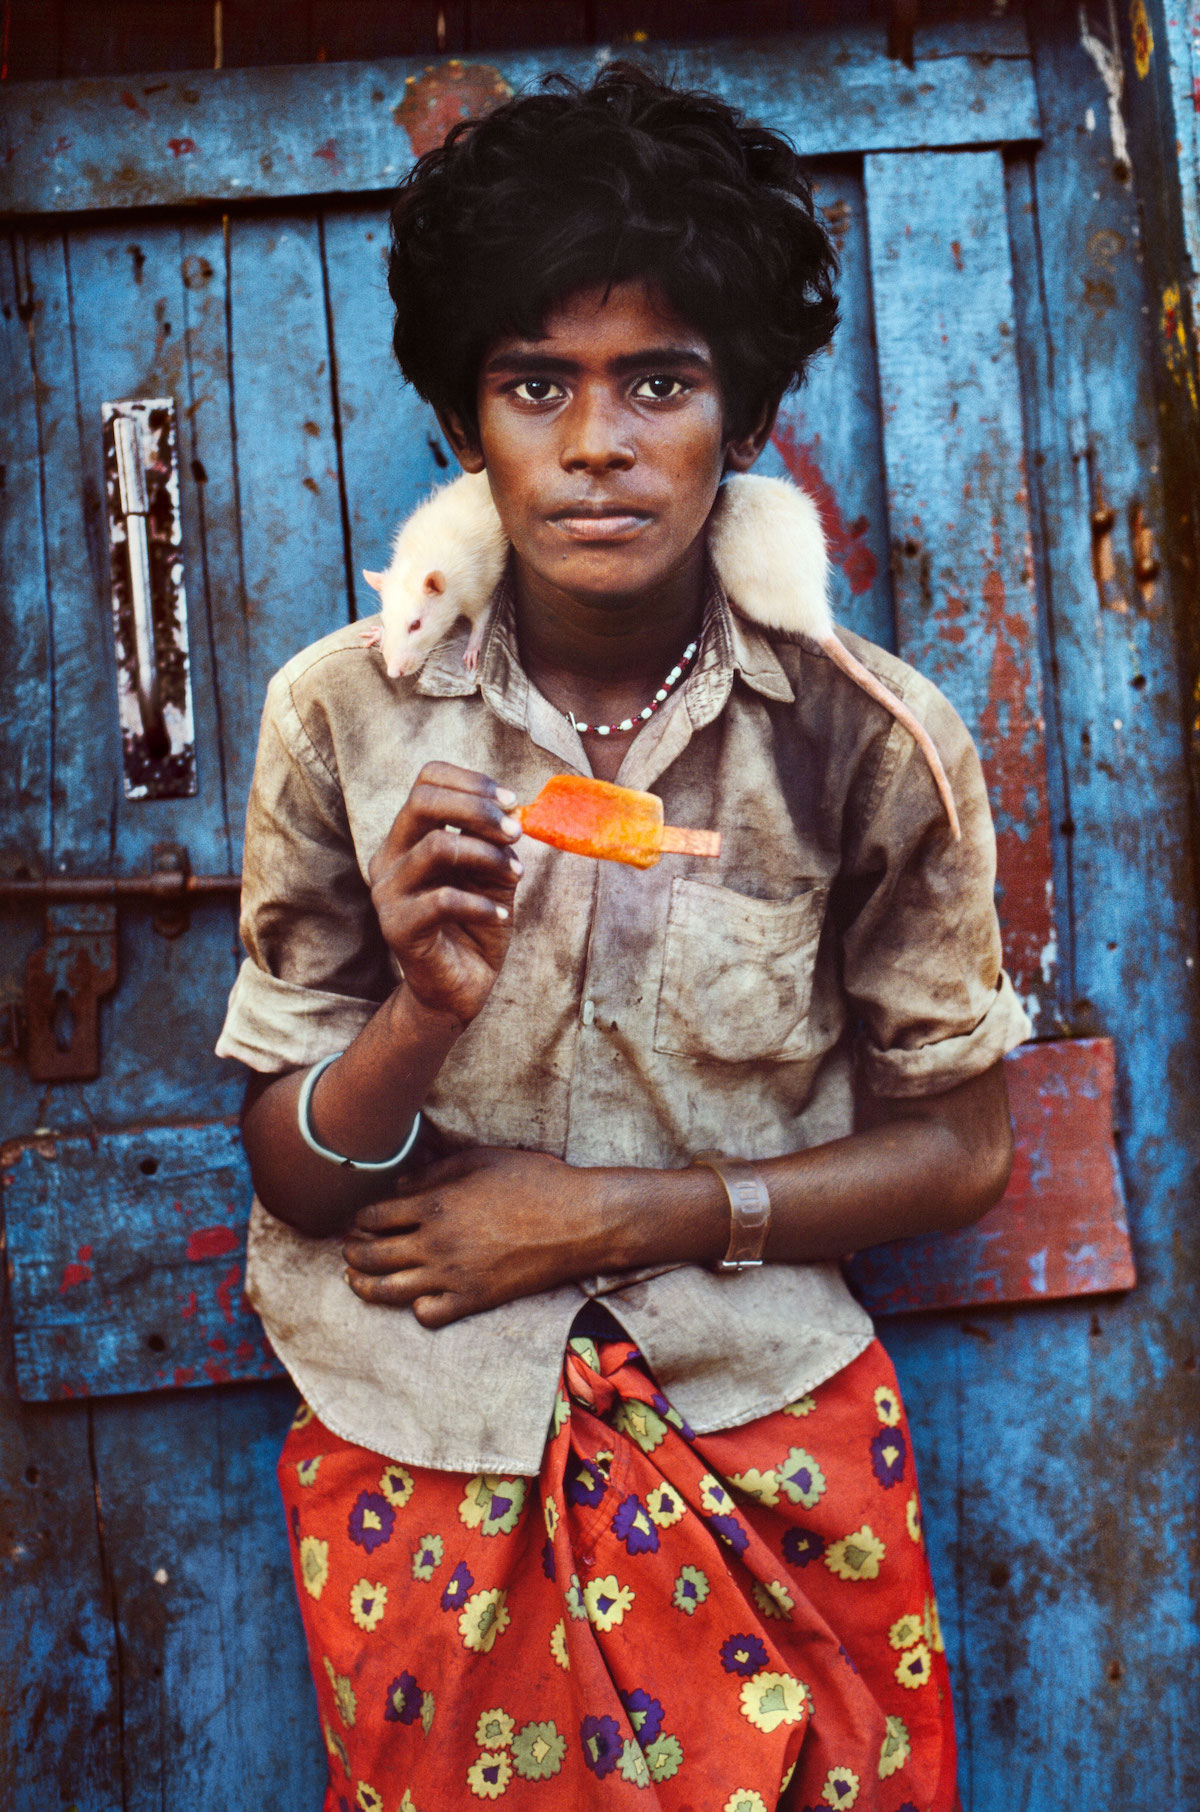 Boy with his Pet Rat in Galapagos by Steve McCurry